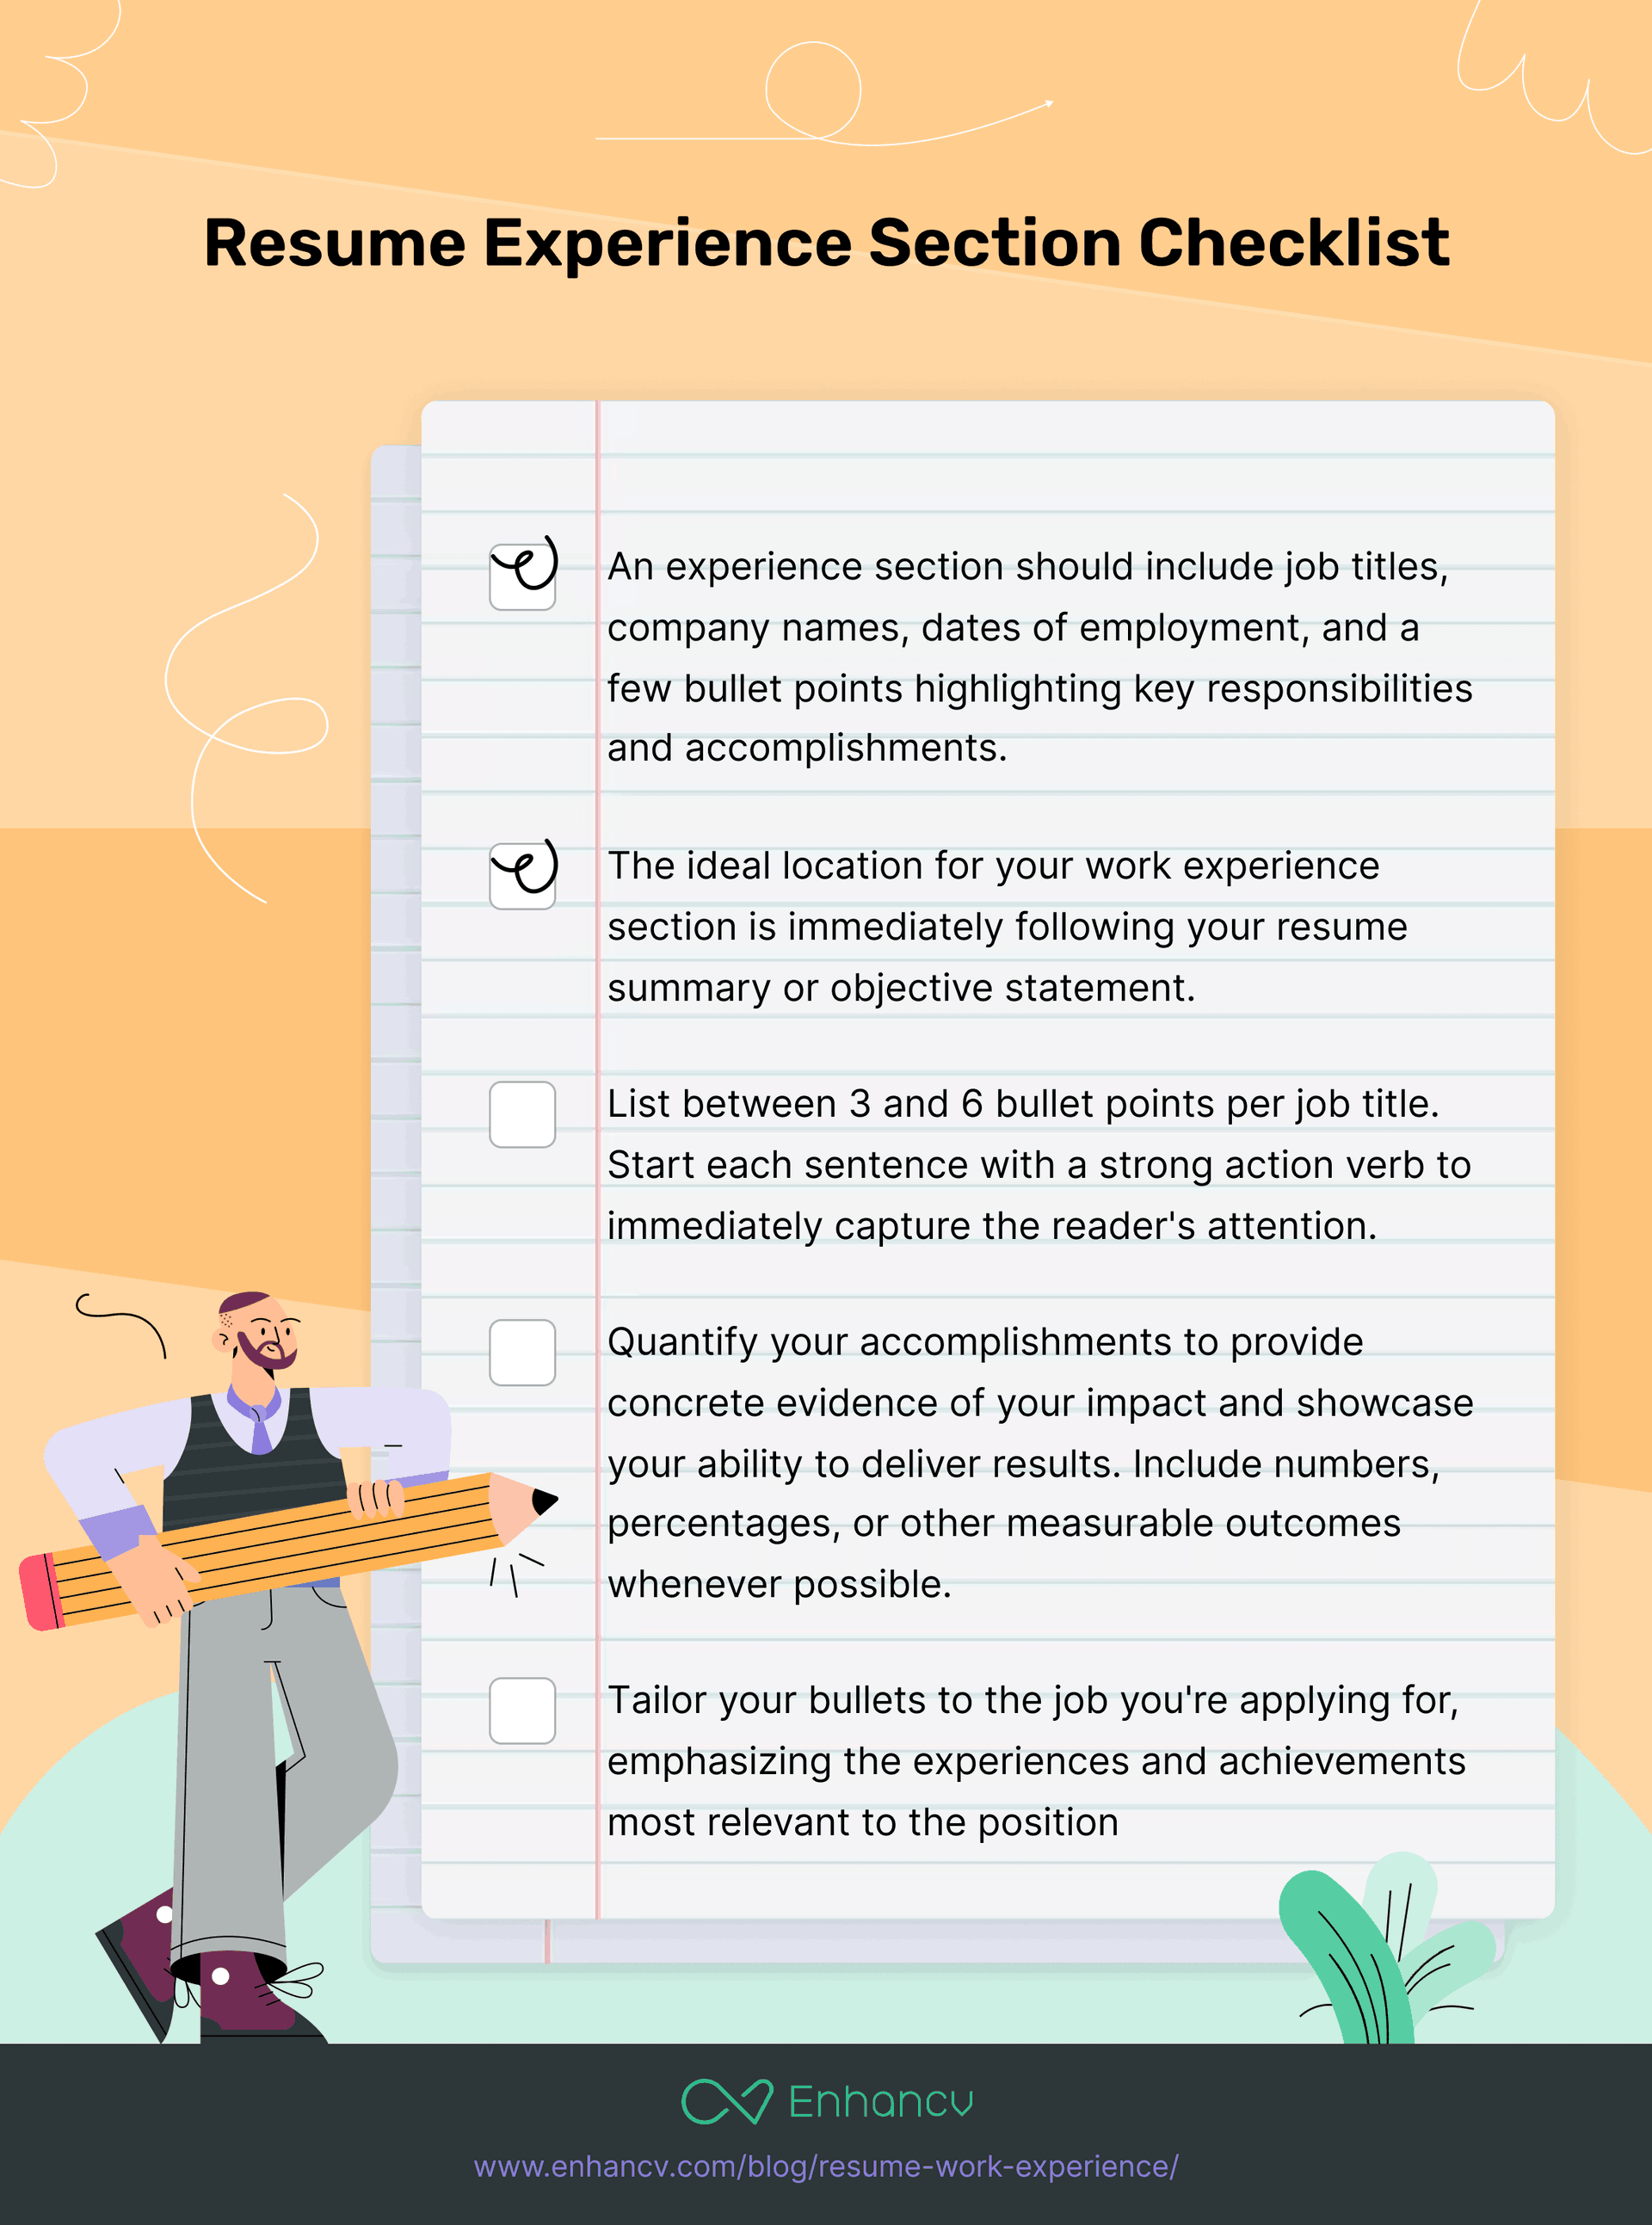 how to write a resume for experience